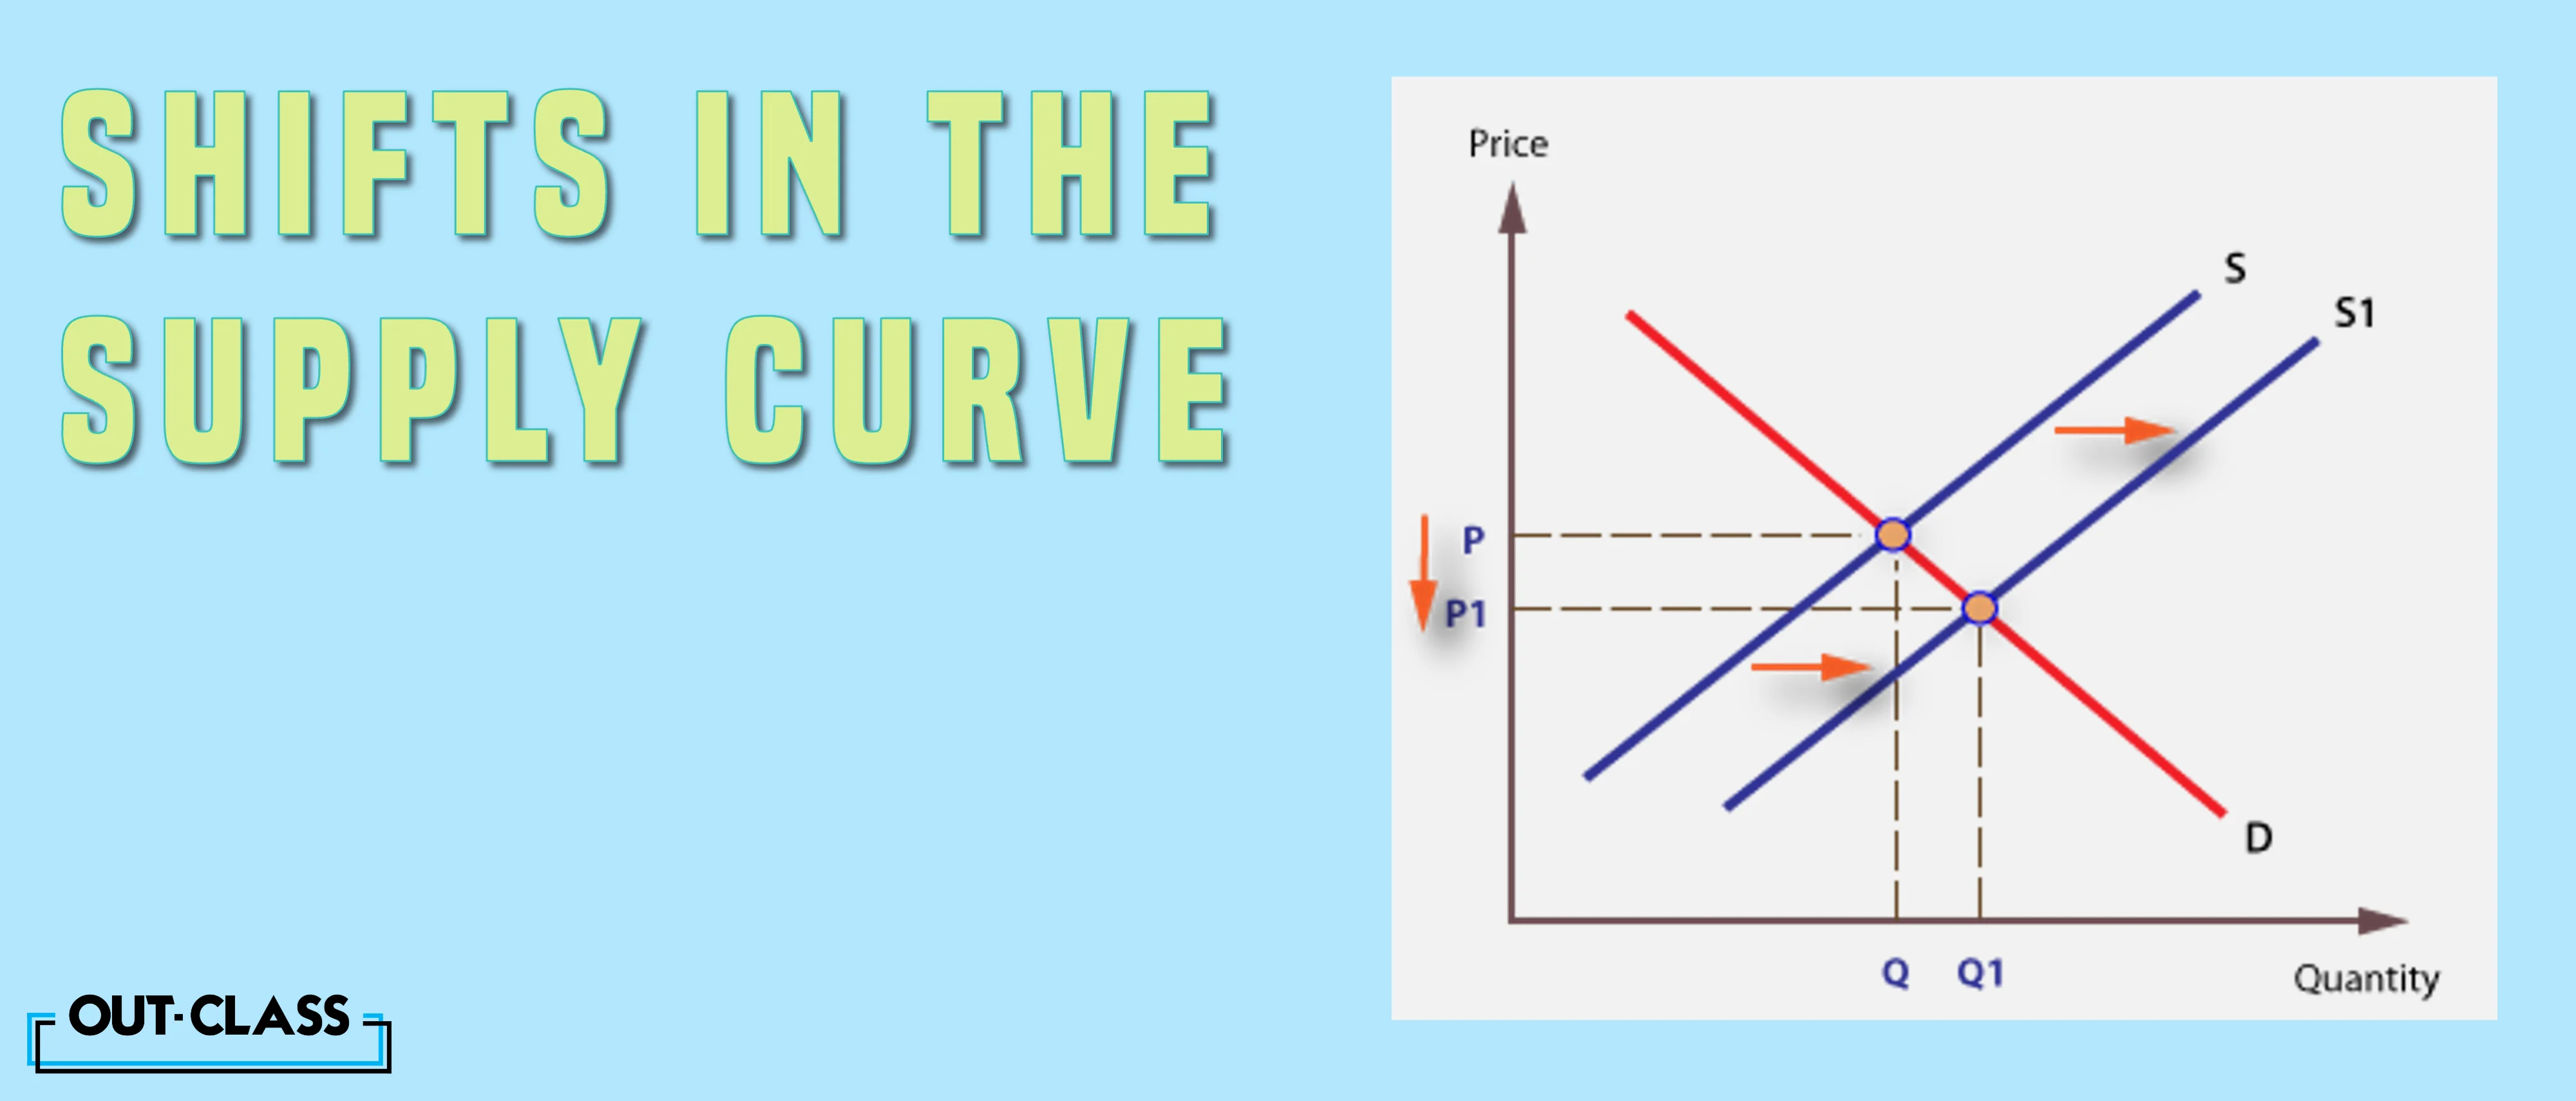 Factors influencing the supply curve and causing a shift in the supply curve.